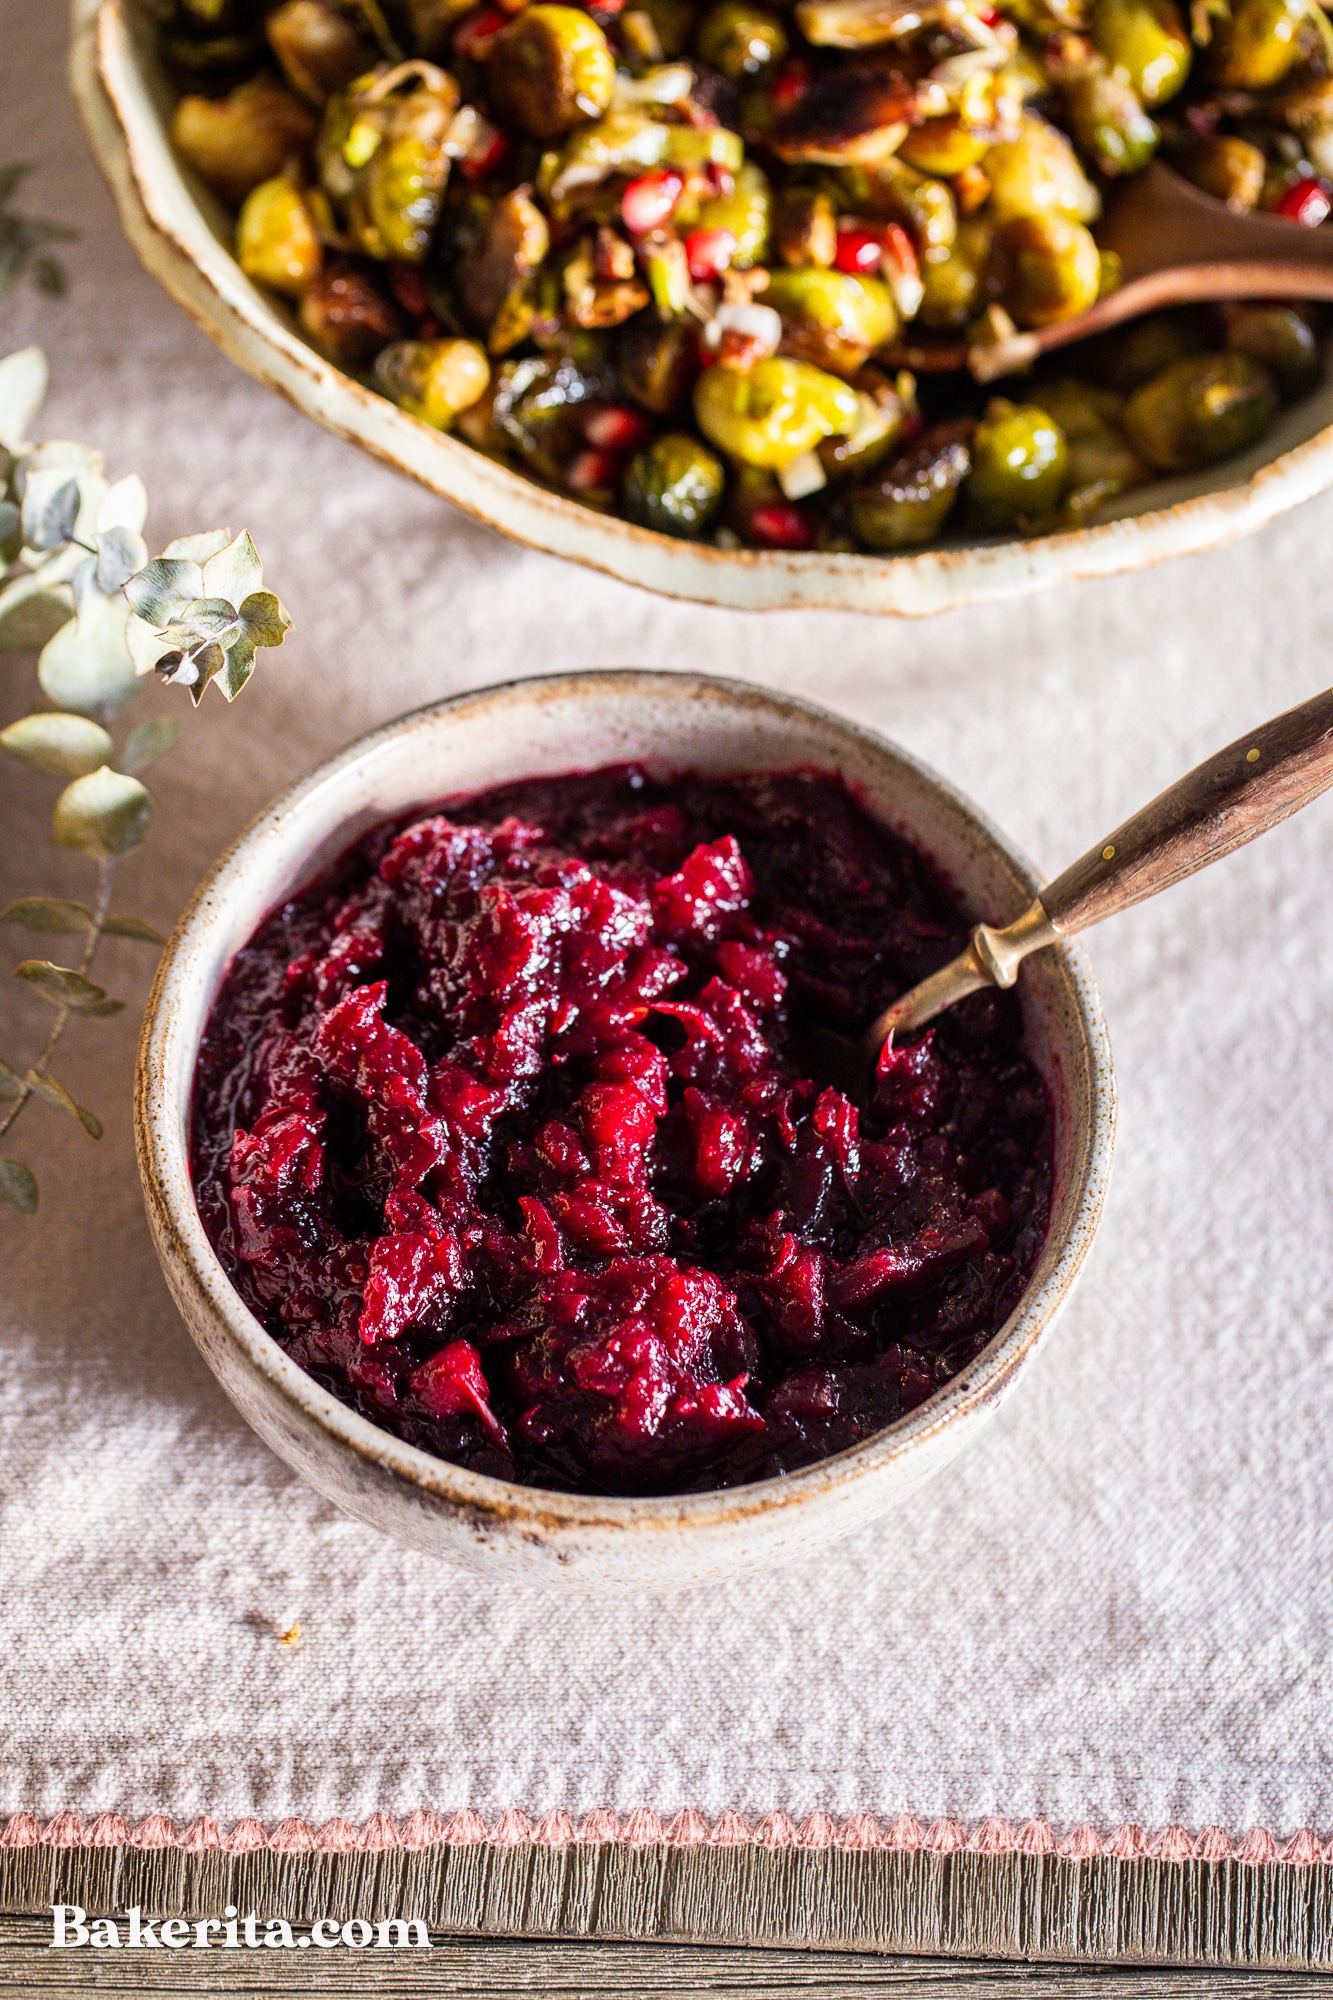 This Healthy Paleo Cranberry Sauce is simple to make, delicious, and sweetened with maple syrup to keep it refined sugar-free. Orange zest and warm spices give this cranberry sauce incredible flavor, and it's done in 15 minutes.